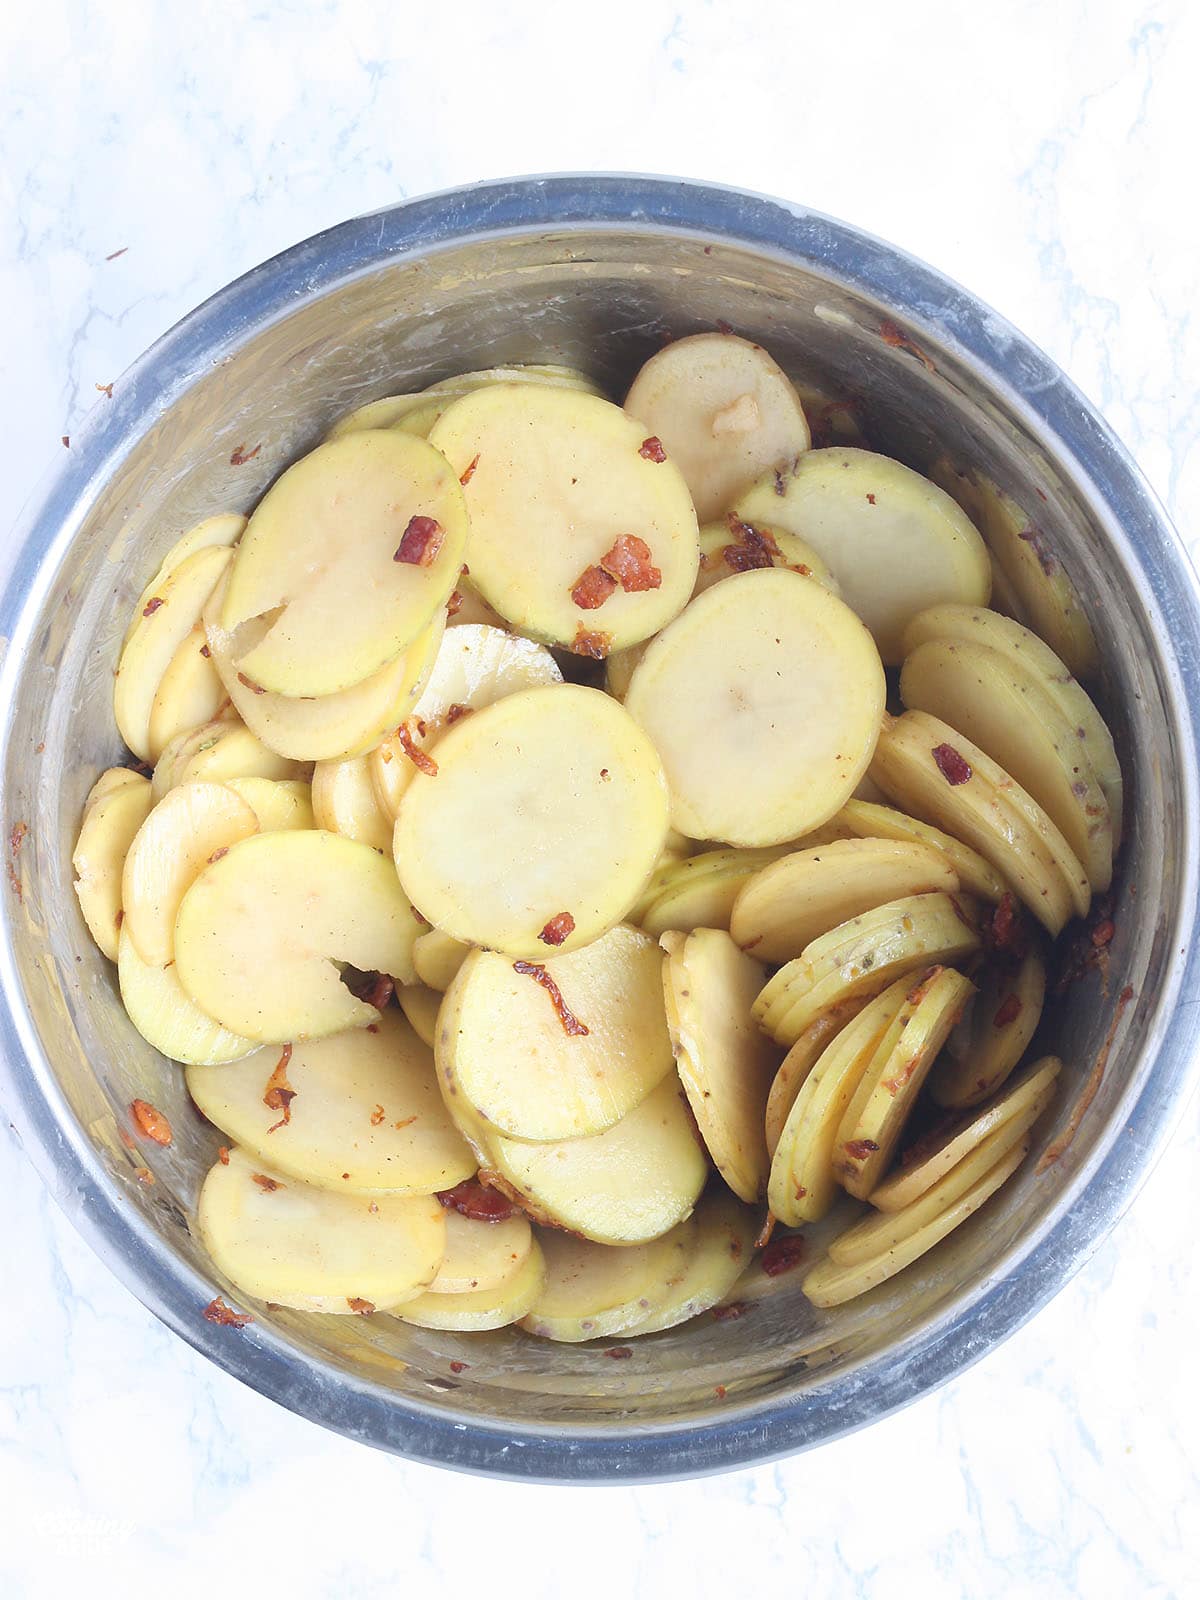 thinkly sliced Yukon gold potatoes in a metal mixing bowl